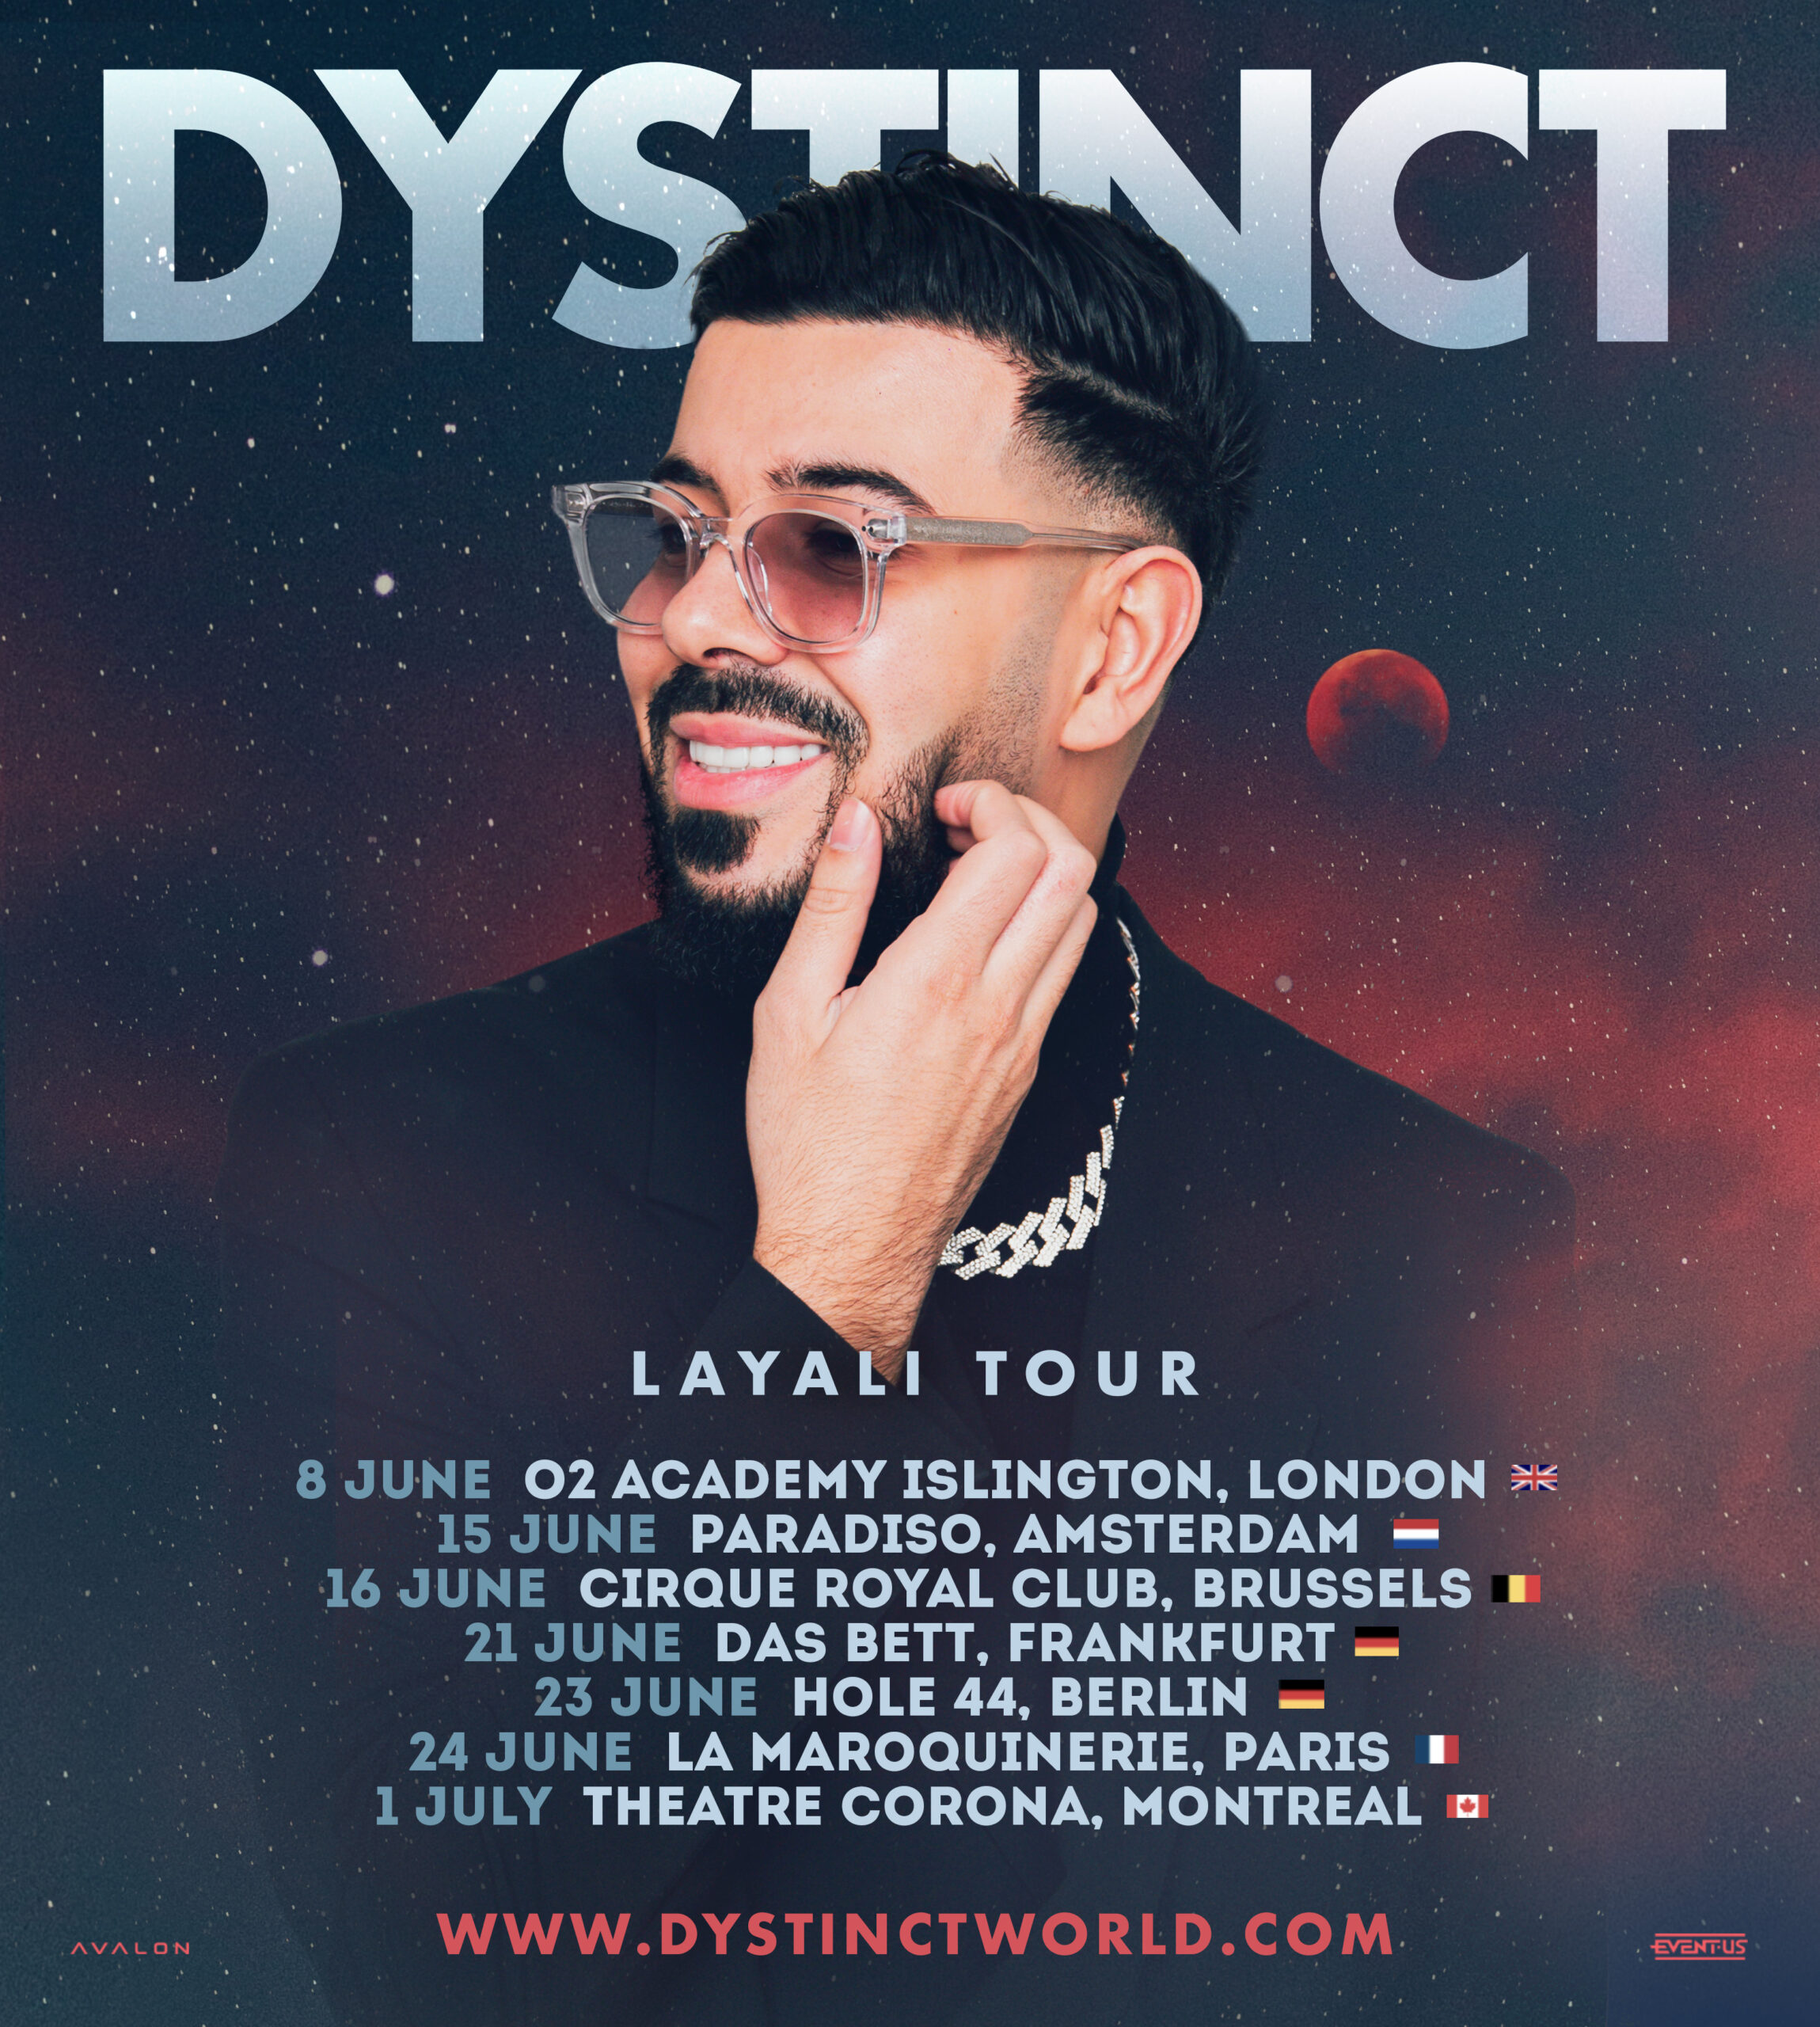 [TICKETS AVAILABLE] DYSTINCT – “LAYALI TOUR”